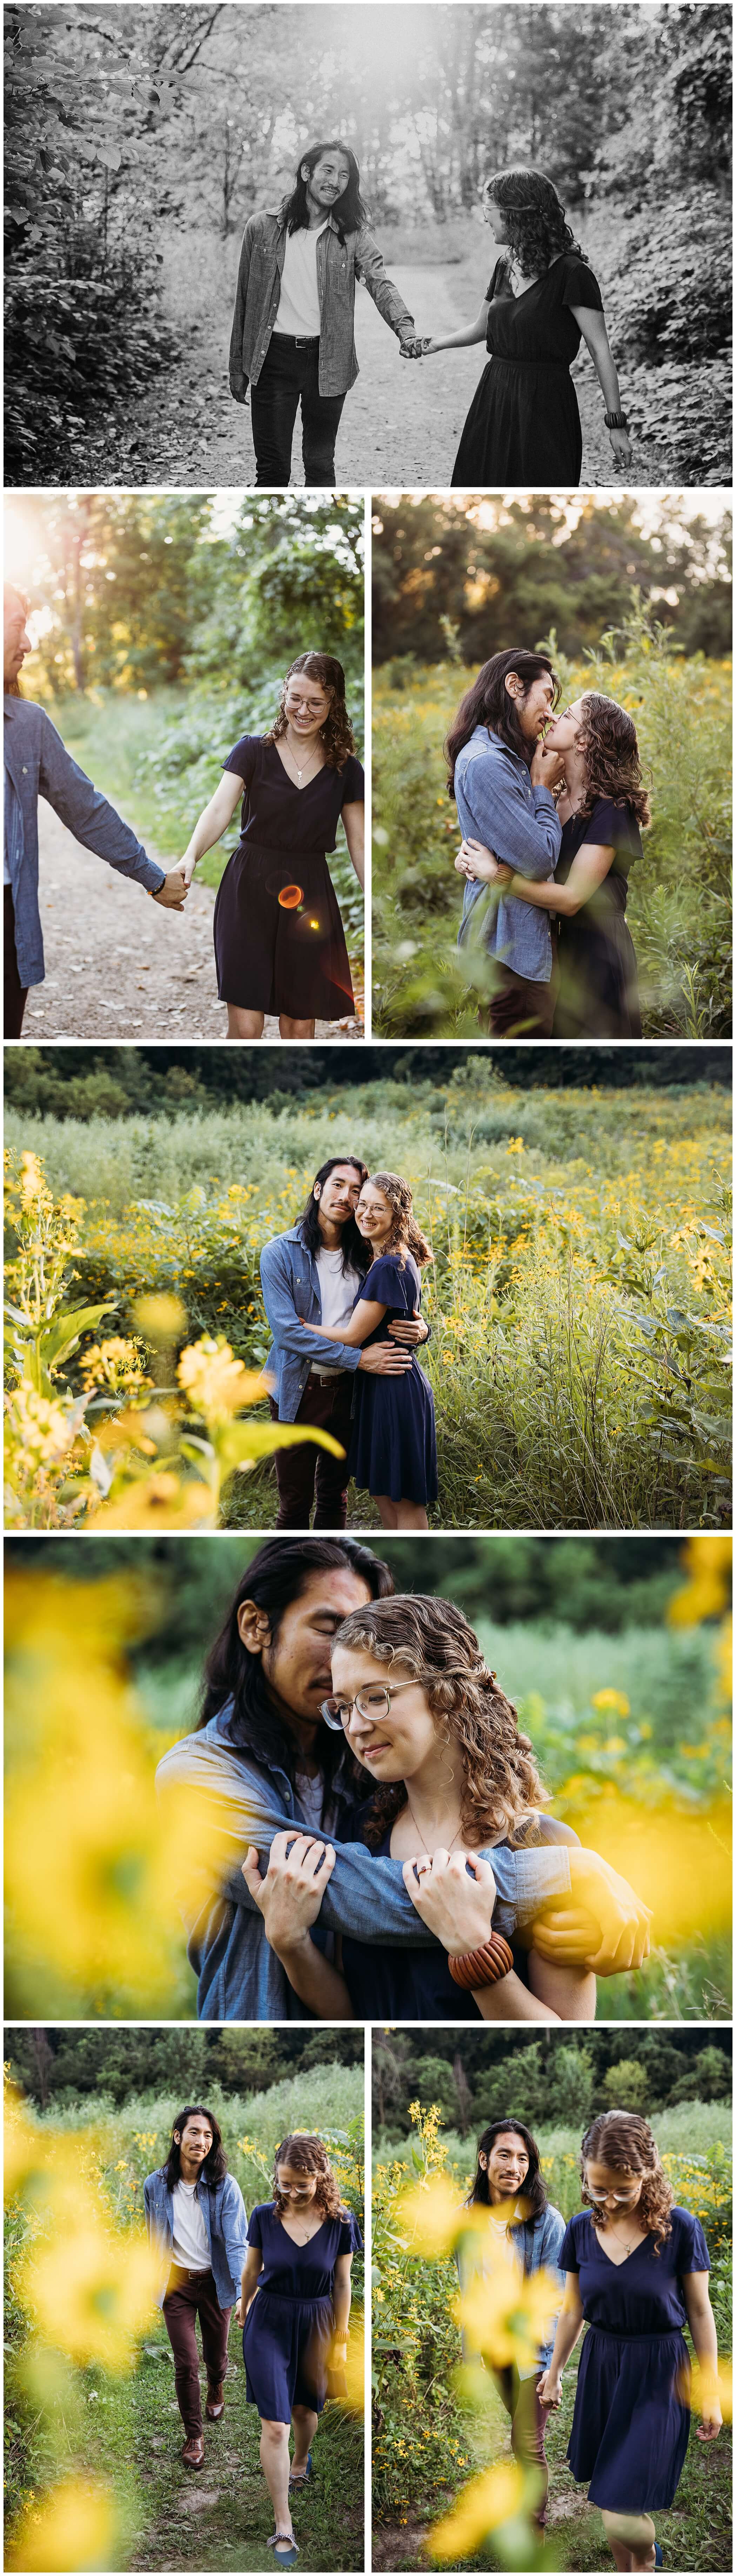 outdoor engagement session in flower field dubuque